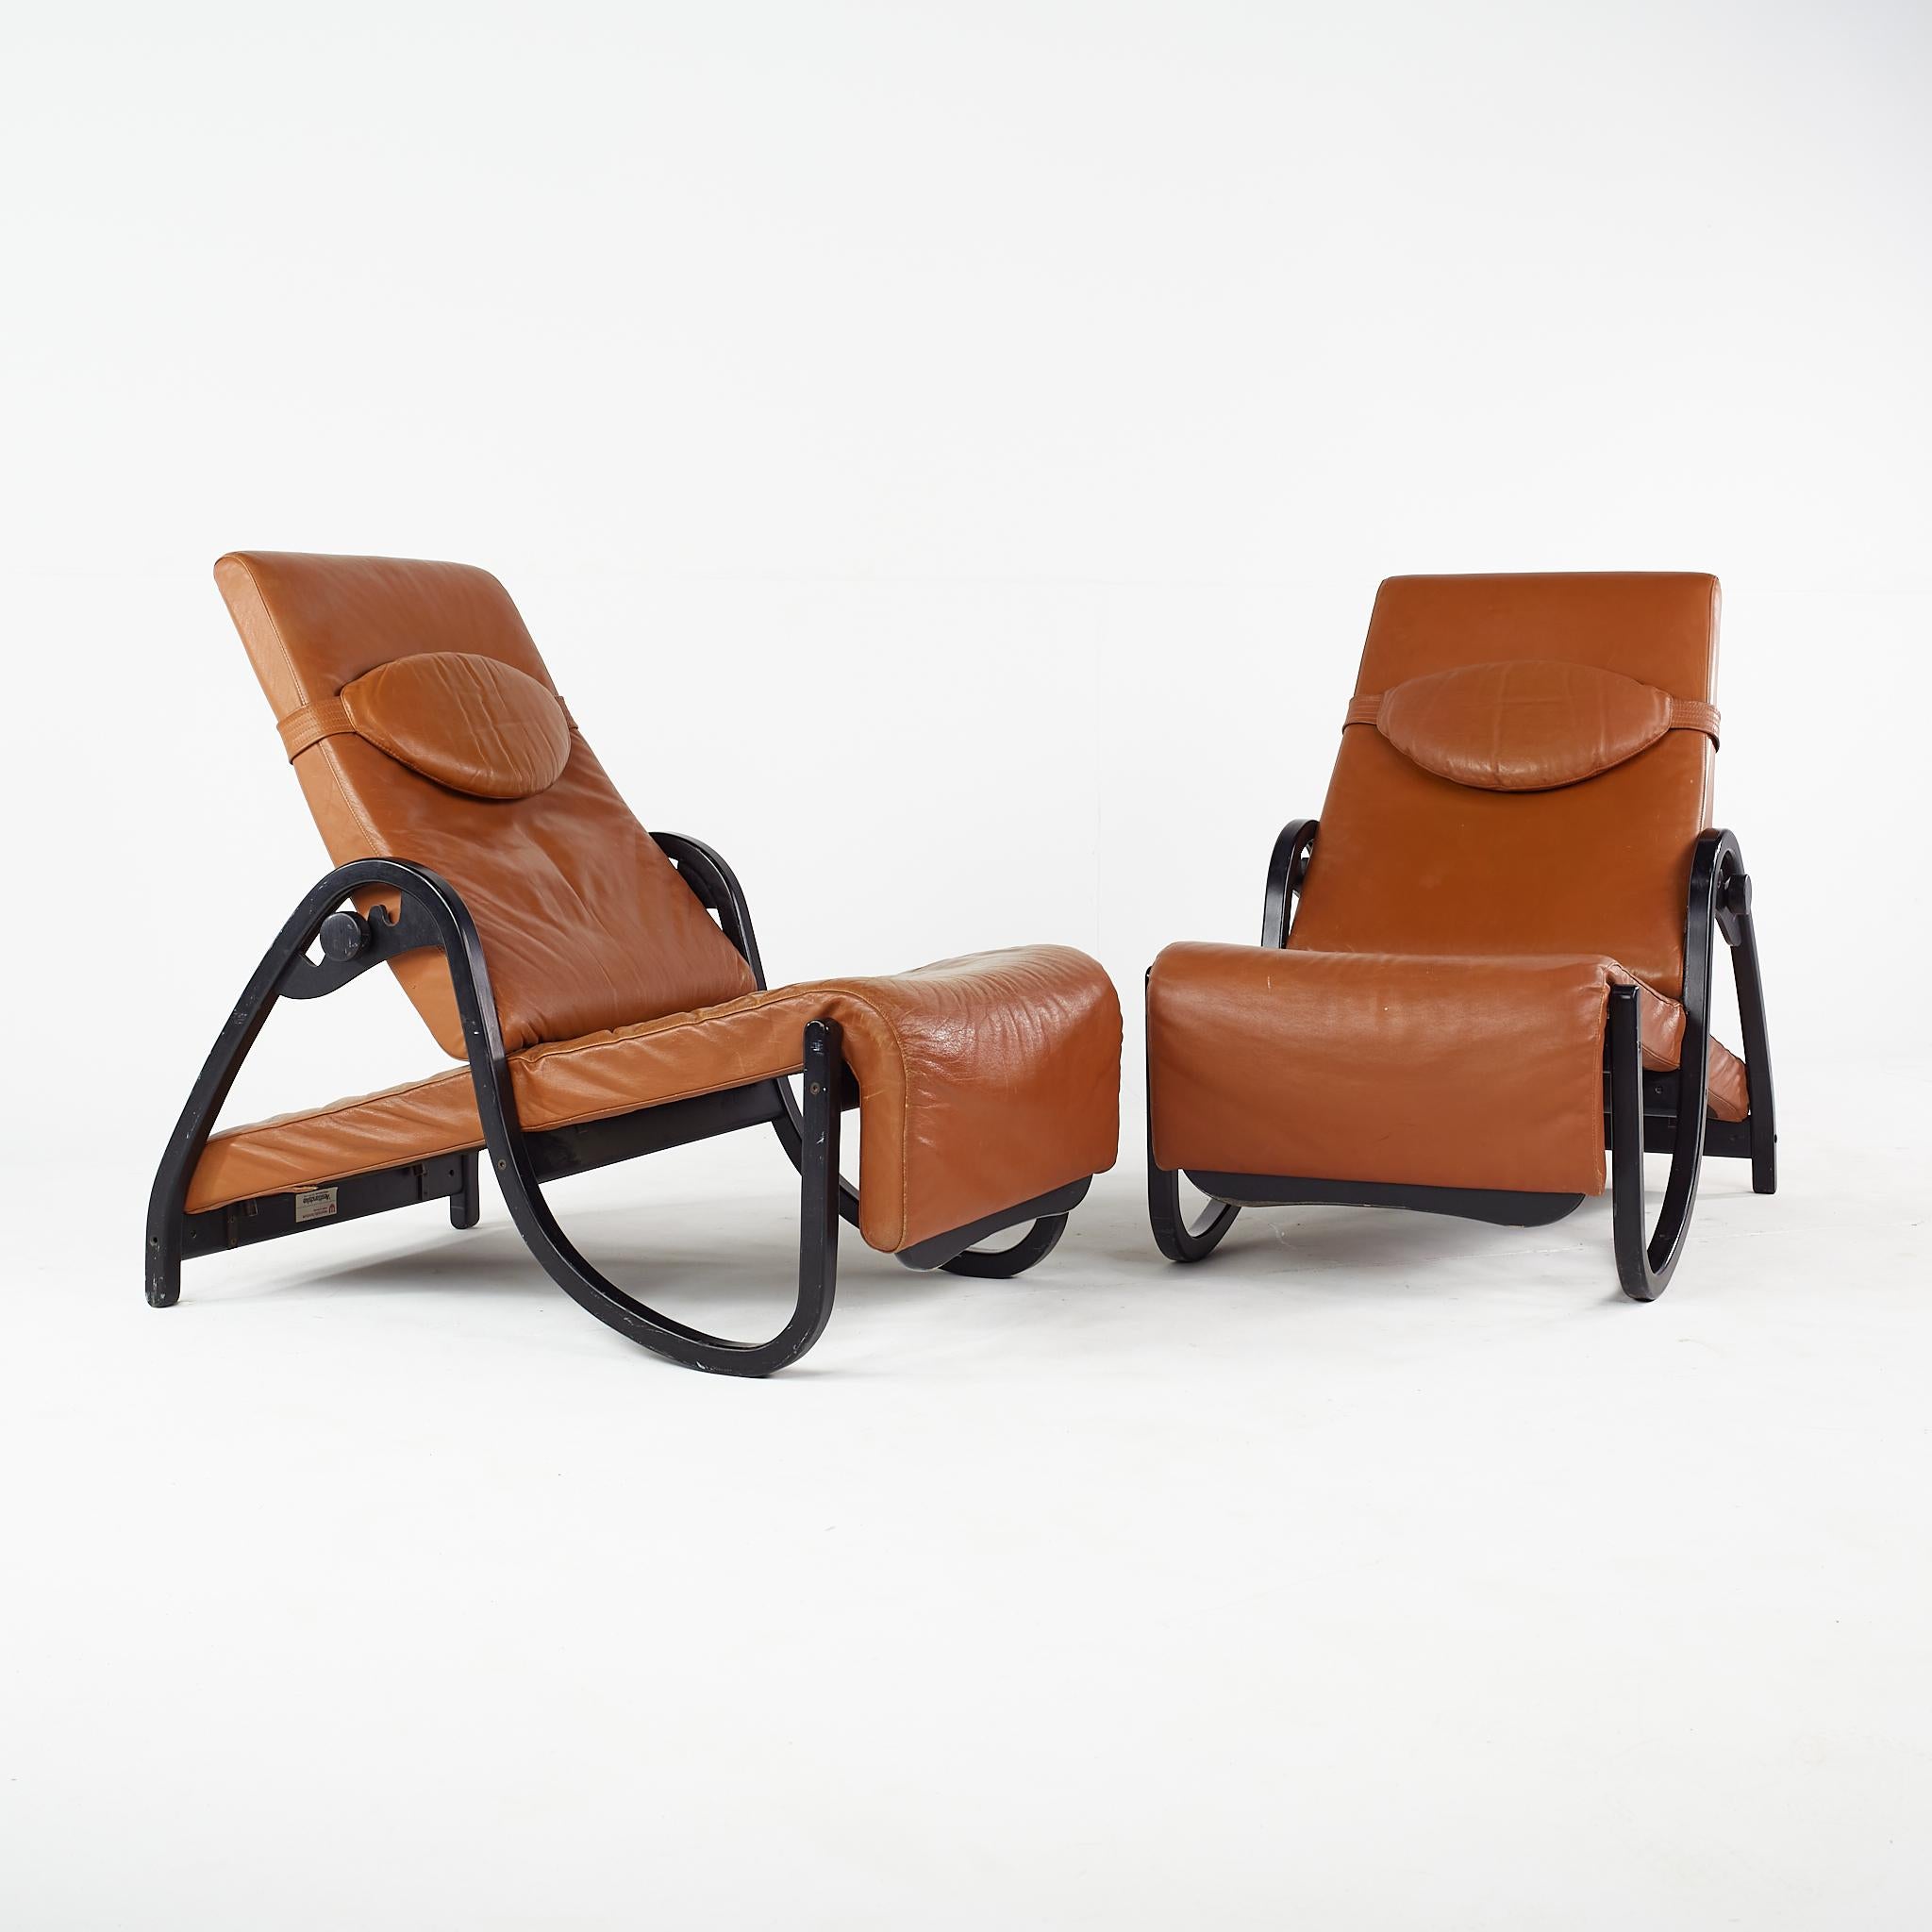 Westnofa Mid Century Leather Reclining Lounge Chairs - Pair

The chair measures: 25 wide x 42 deep x 30.5 high, with a seat height of 17 inches

All pieces of furniture can be had in what we call restored vintage condition. That means the piece is